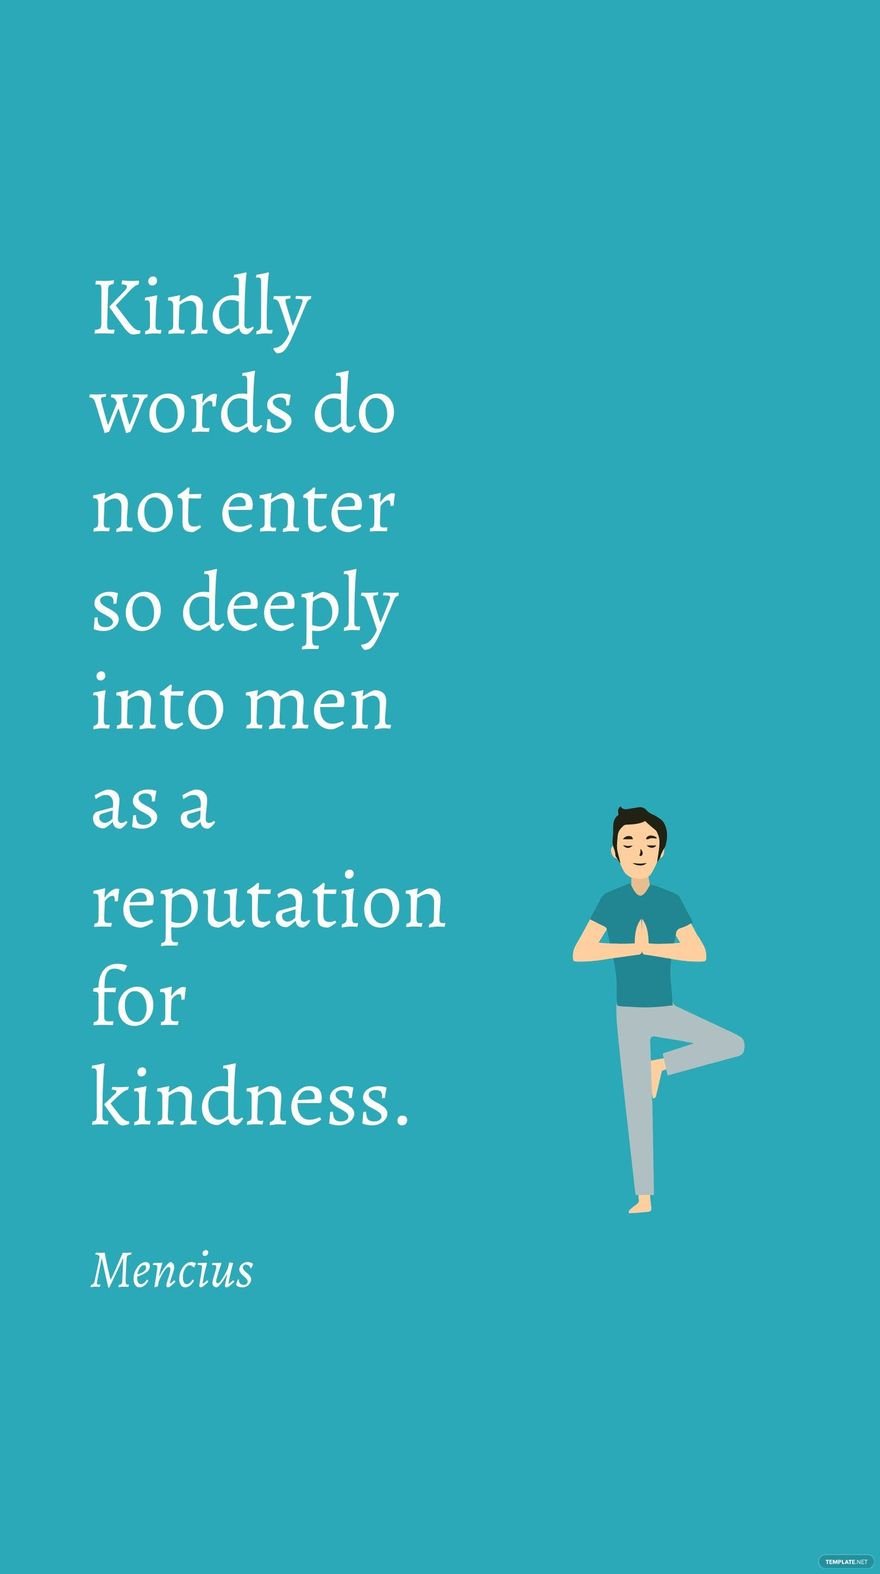 Free Mencius - Kindly words do not enter so deeply into men as a reputation for kindness.